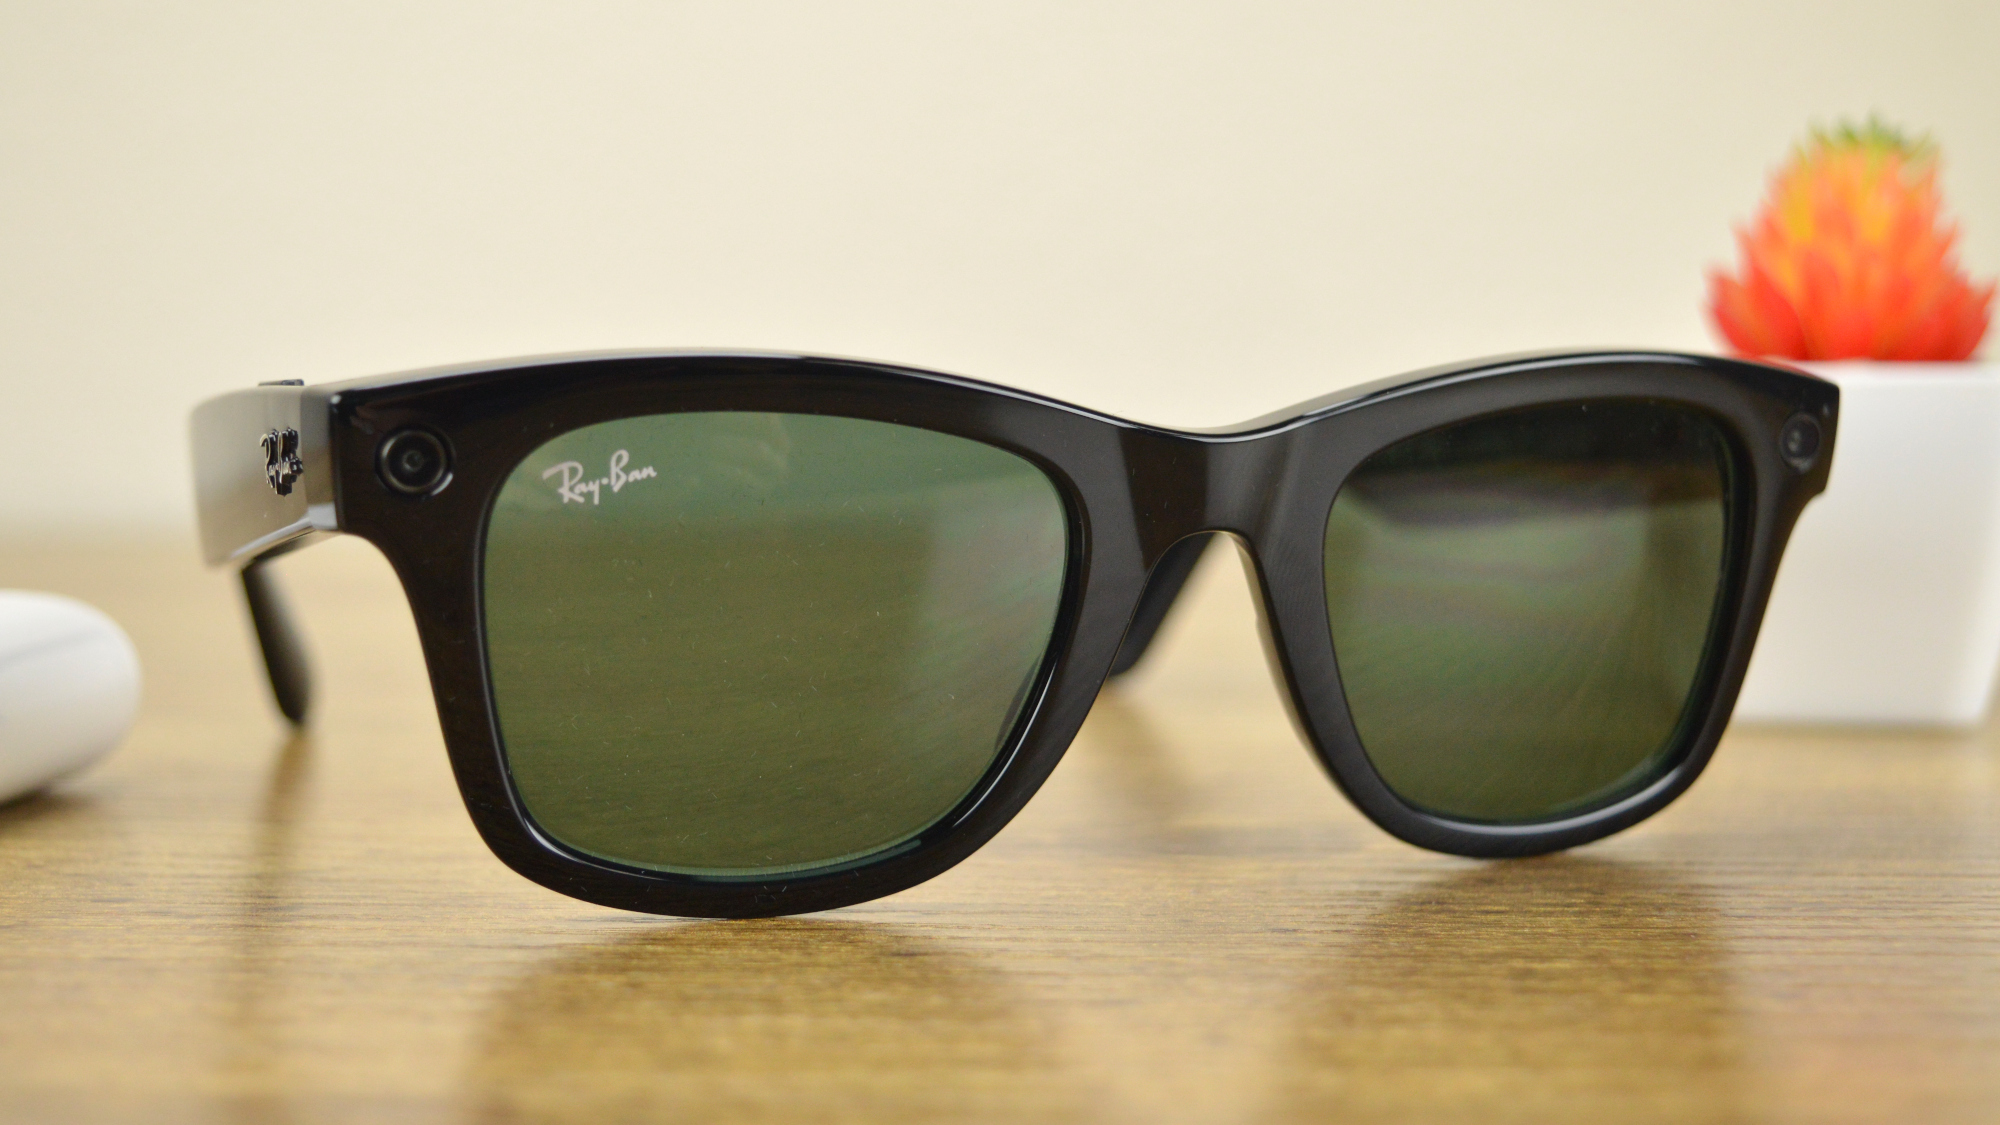 Facebook Ray-Ban Stories smart glasses review: Cameras on your face thumbnail